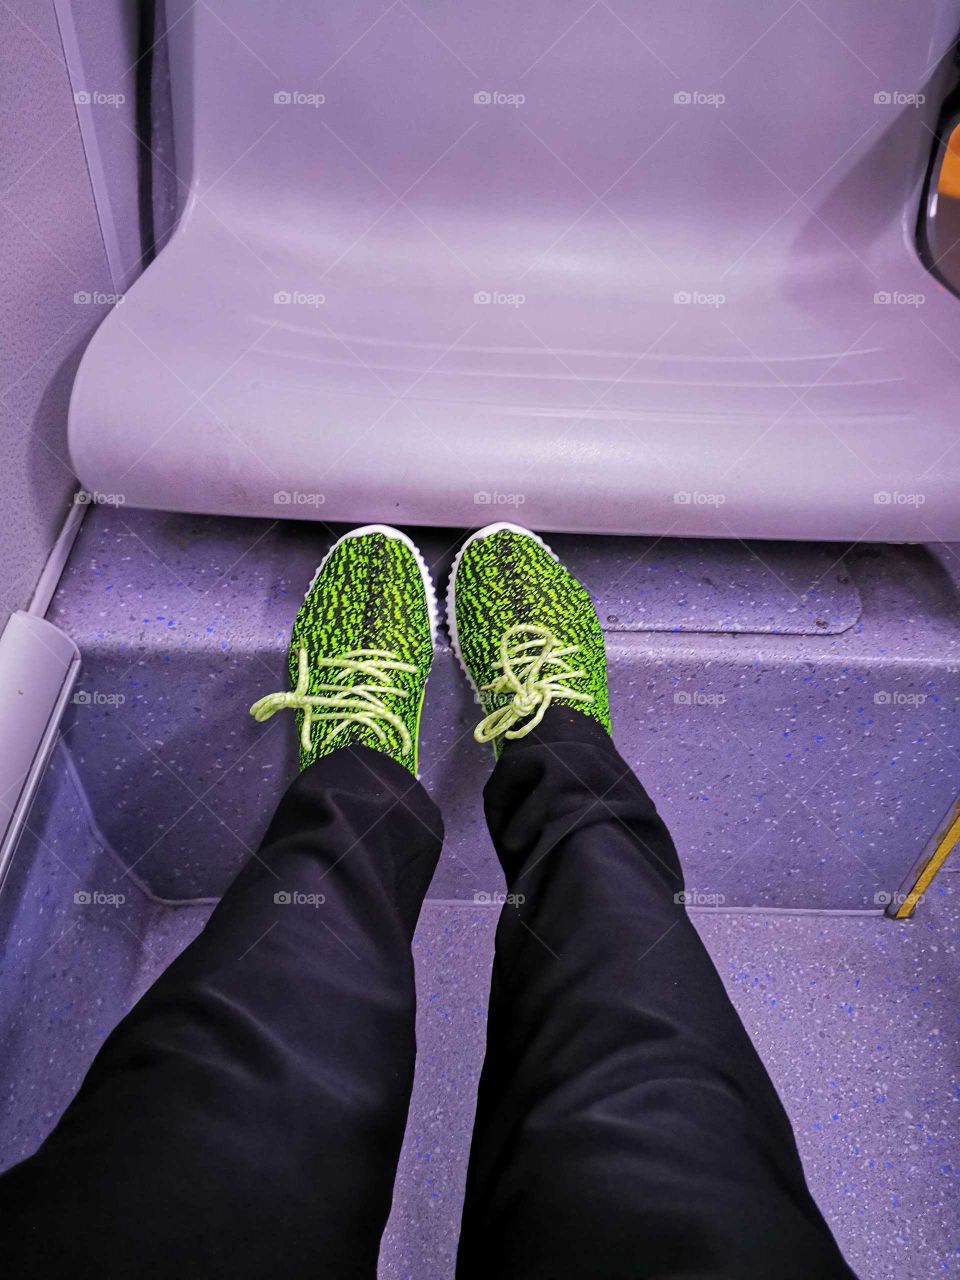 My beautiful and green  shoes